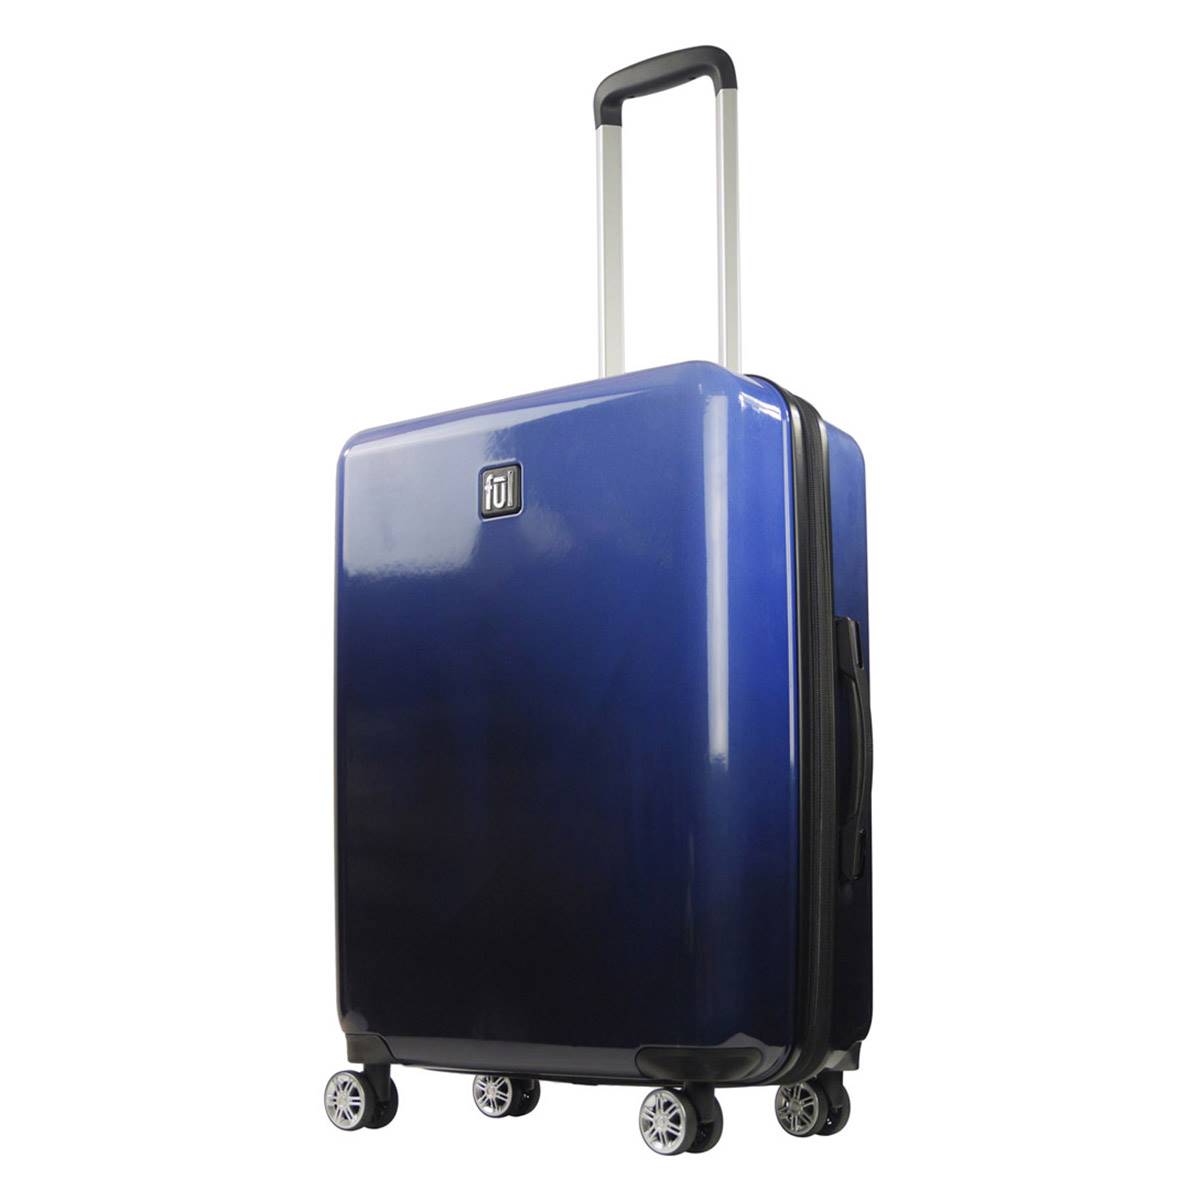 FUL 26in. Impulse Ombre Hardside Spinner Luggage